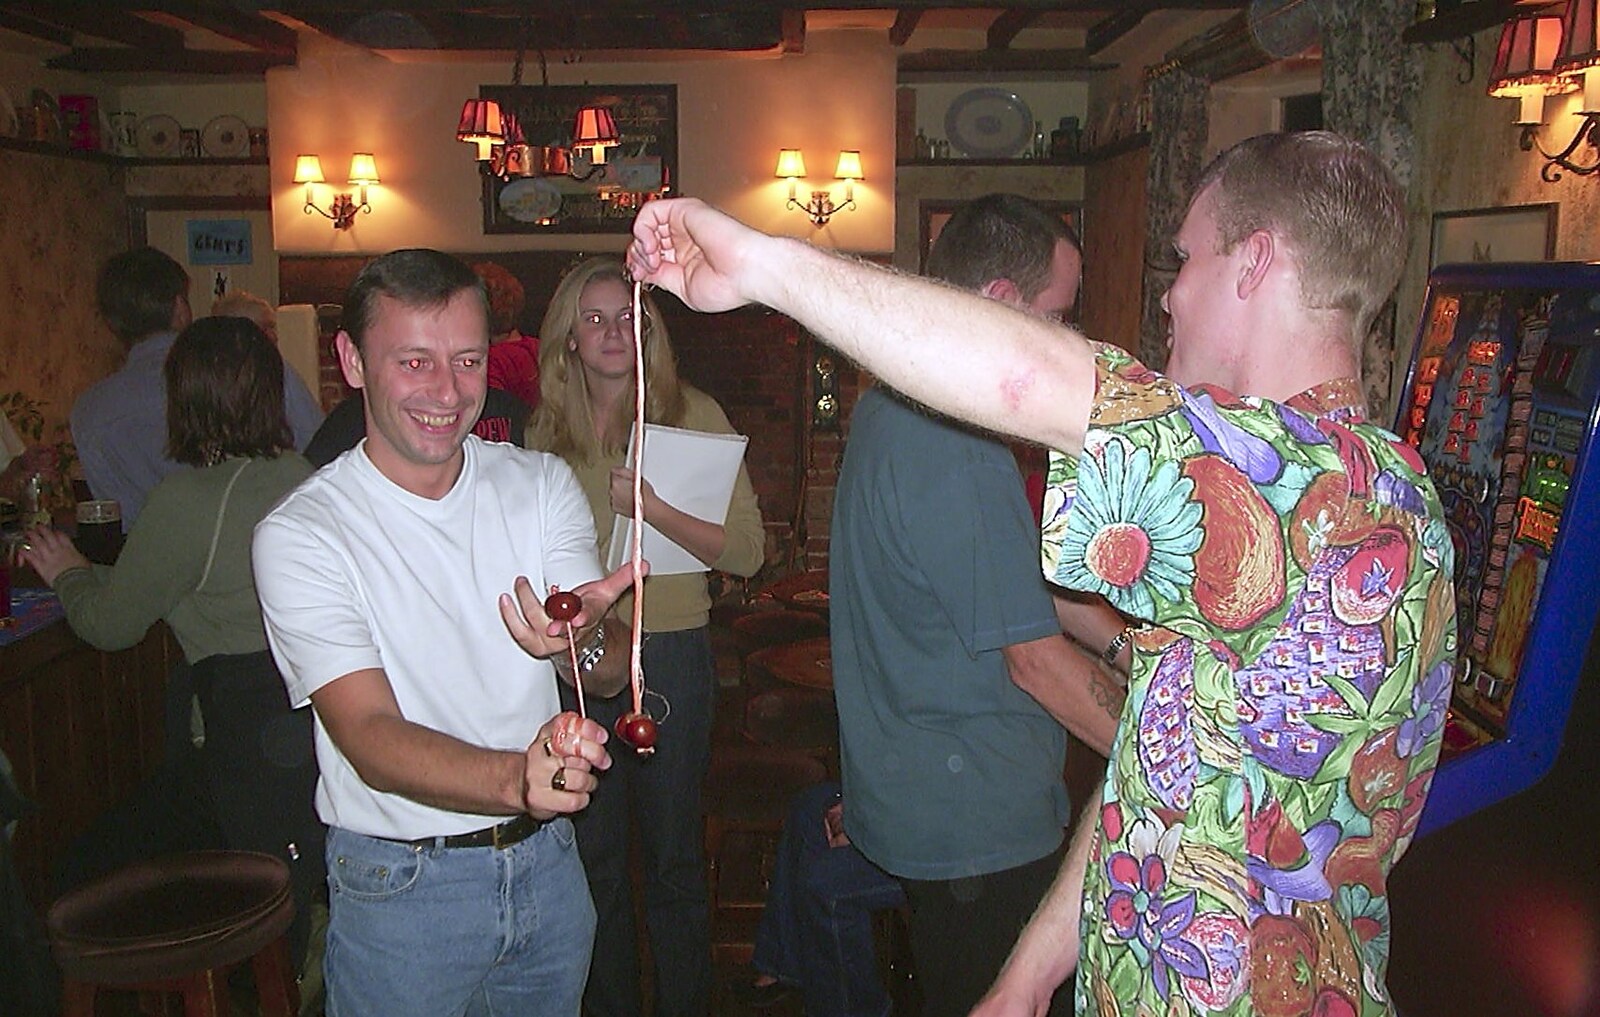 Ian lines up against Mikey P's conker from Conkers at The Swan Inn and 3G Lab Pizza, Cambridge - 10th October 2001